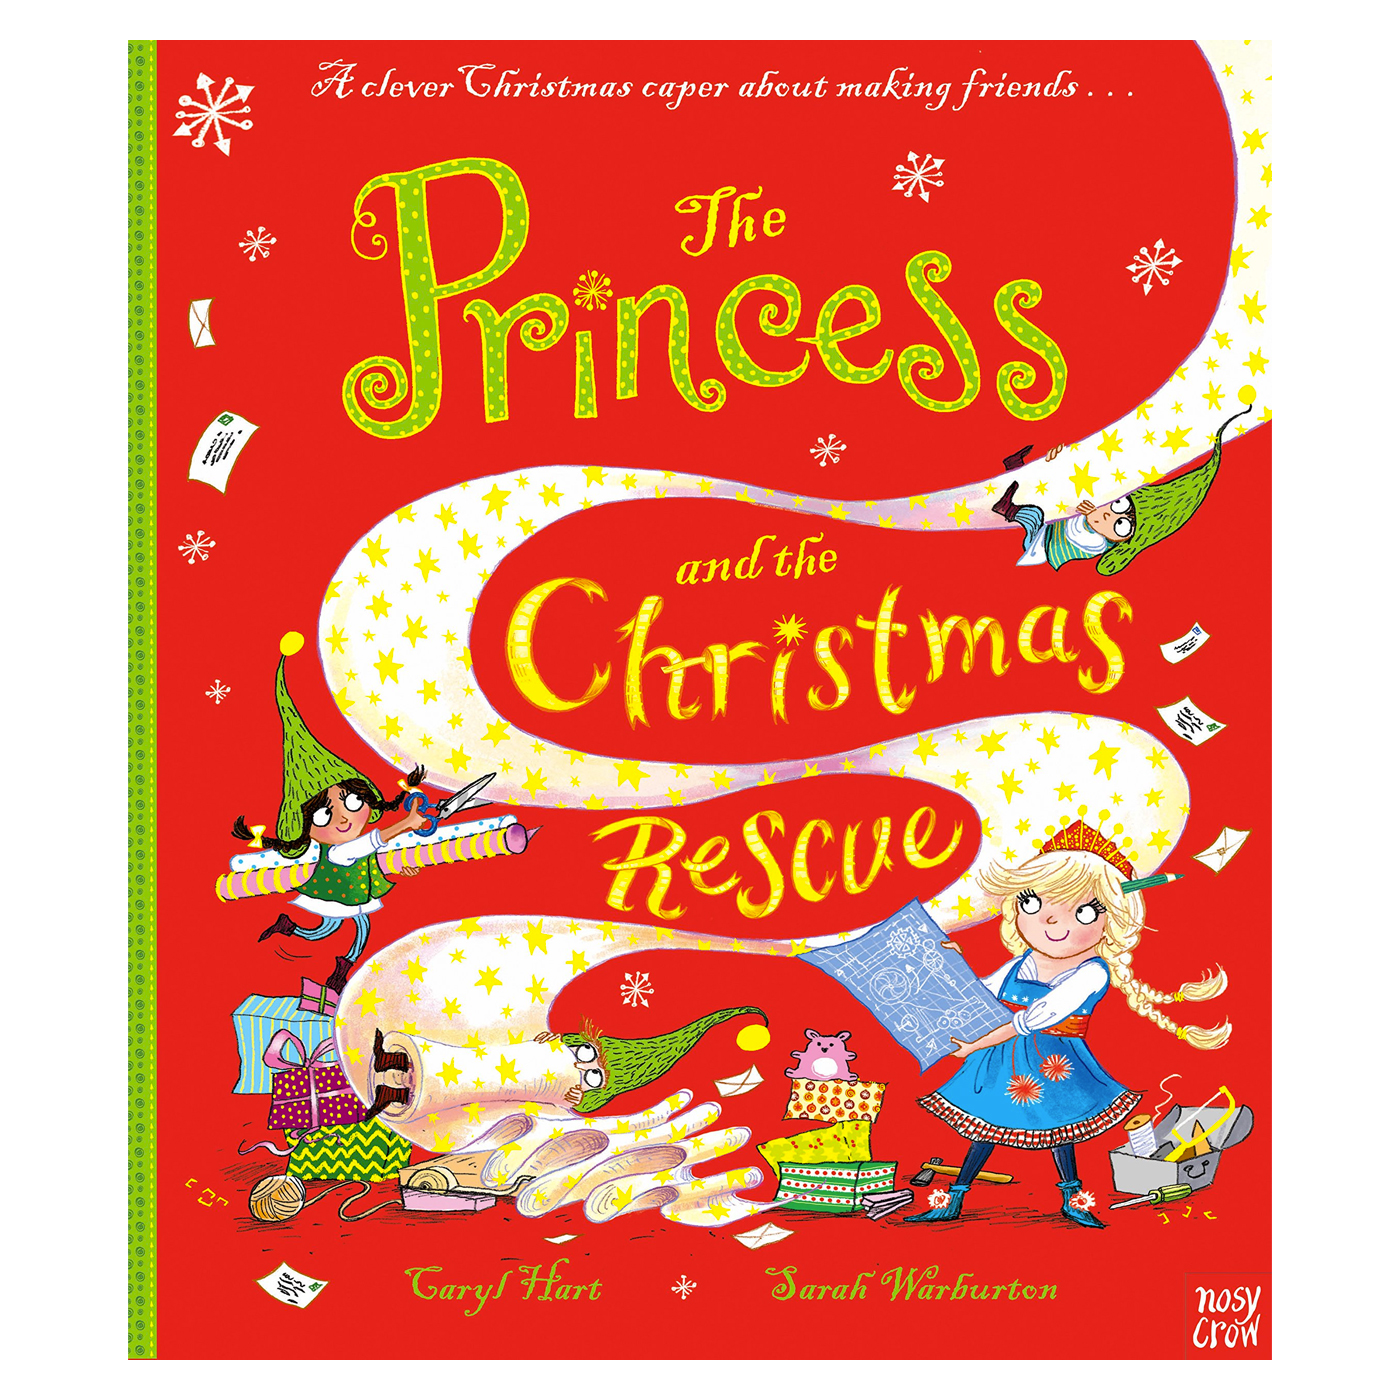  The Princess and the Christmas Rescue